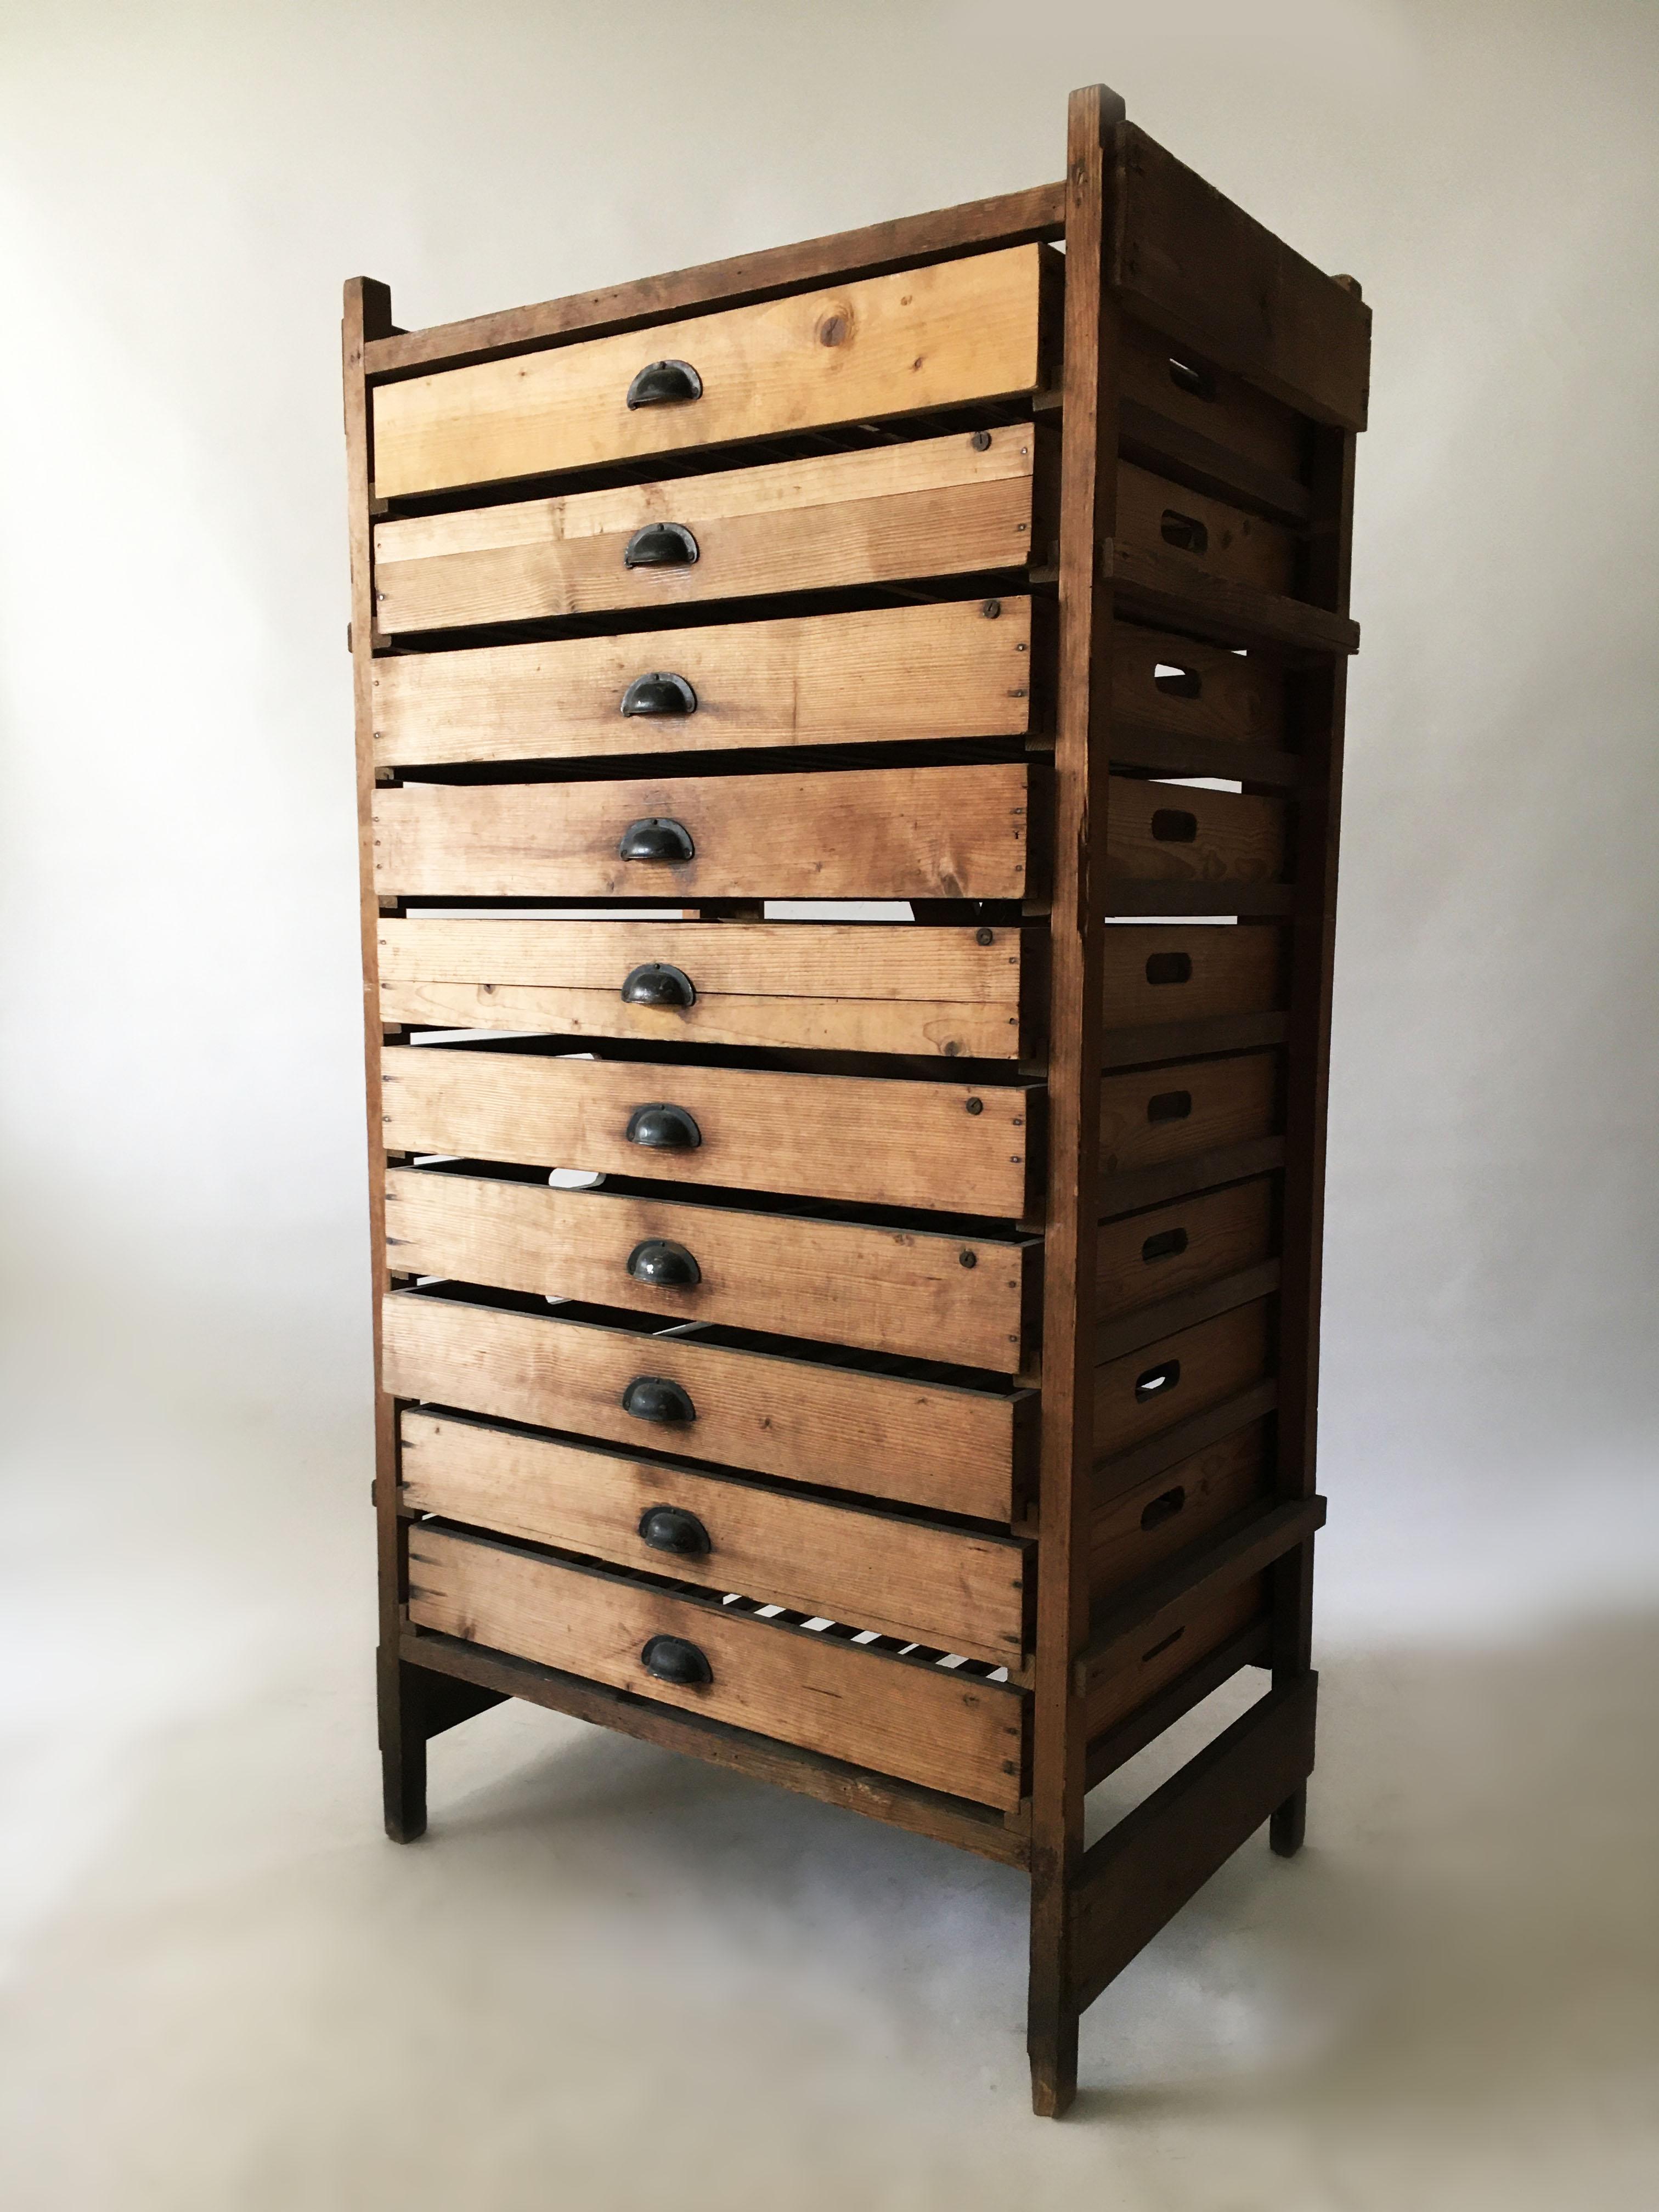 Primitive Modern Architectural Fruit Drying Cabinet, France 1920s. A beautiful antique architectural fruit drying cabinet made of wood and black metal pulls, circa 1920s from France.